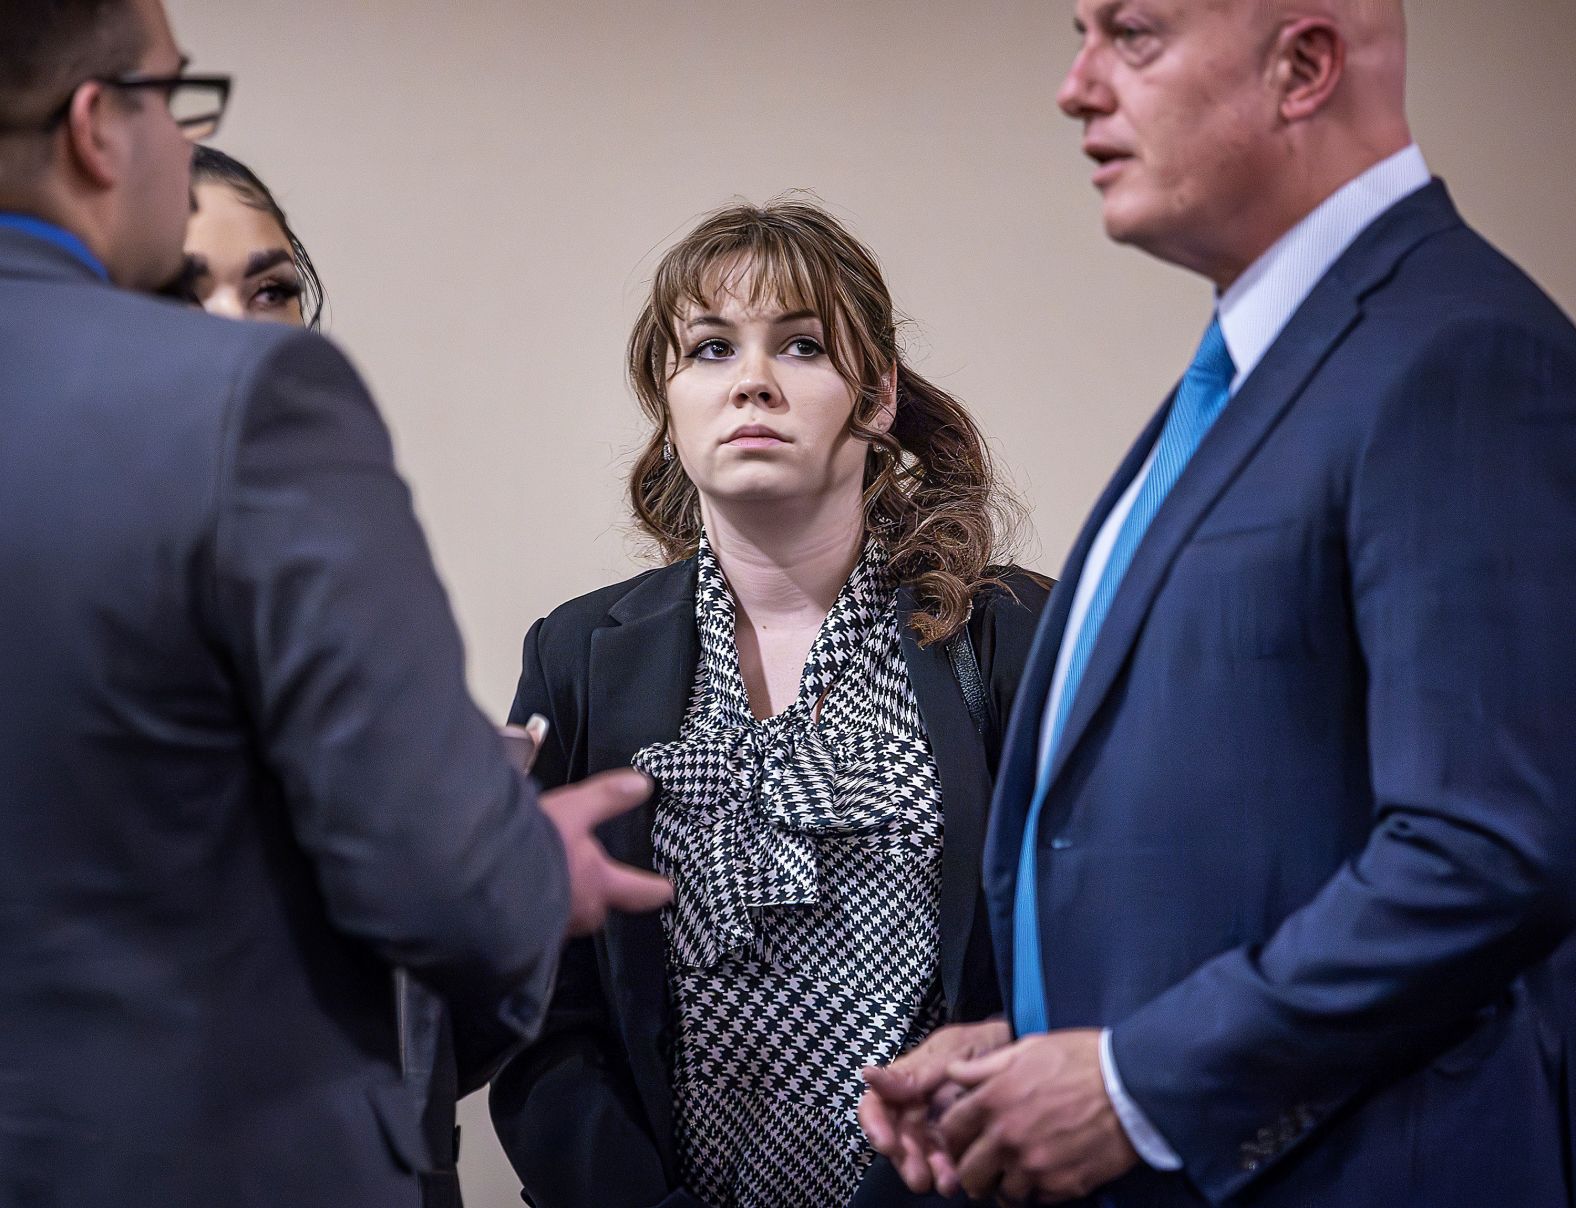 Hannah Gutierrez Reed, the "Rust" film armorer, talks with attorney Jason Bowles, right, and her defense team during a trial in Santa Fe, New Mexico, on Tuesday, March 5. She was <a href="index.php?page=&url=https%3A%2F%2Fwww.cnn.com%2F2024%2F03%2F06%2Fentertainment%2Frust-trial-hannah-gutierrez-reed%2Findex.html" target="_blank">found guilty of involuntary manslaughter</a> on Wednesday, stemming from the on-set fatal shooting of cinematographer Halyna Hutchins. In 2021, Hutchins was killed by a live round of ammunition fired from a prop gun that was held by actor Alec Baldwin. Gutierrez Reed was responsible for firearm safety and storage on the movie's set.